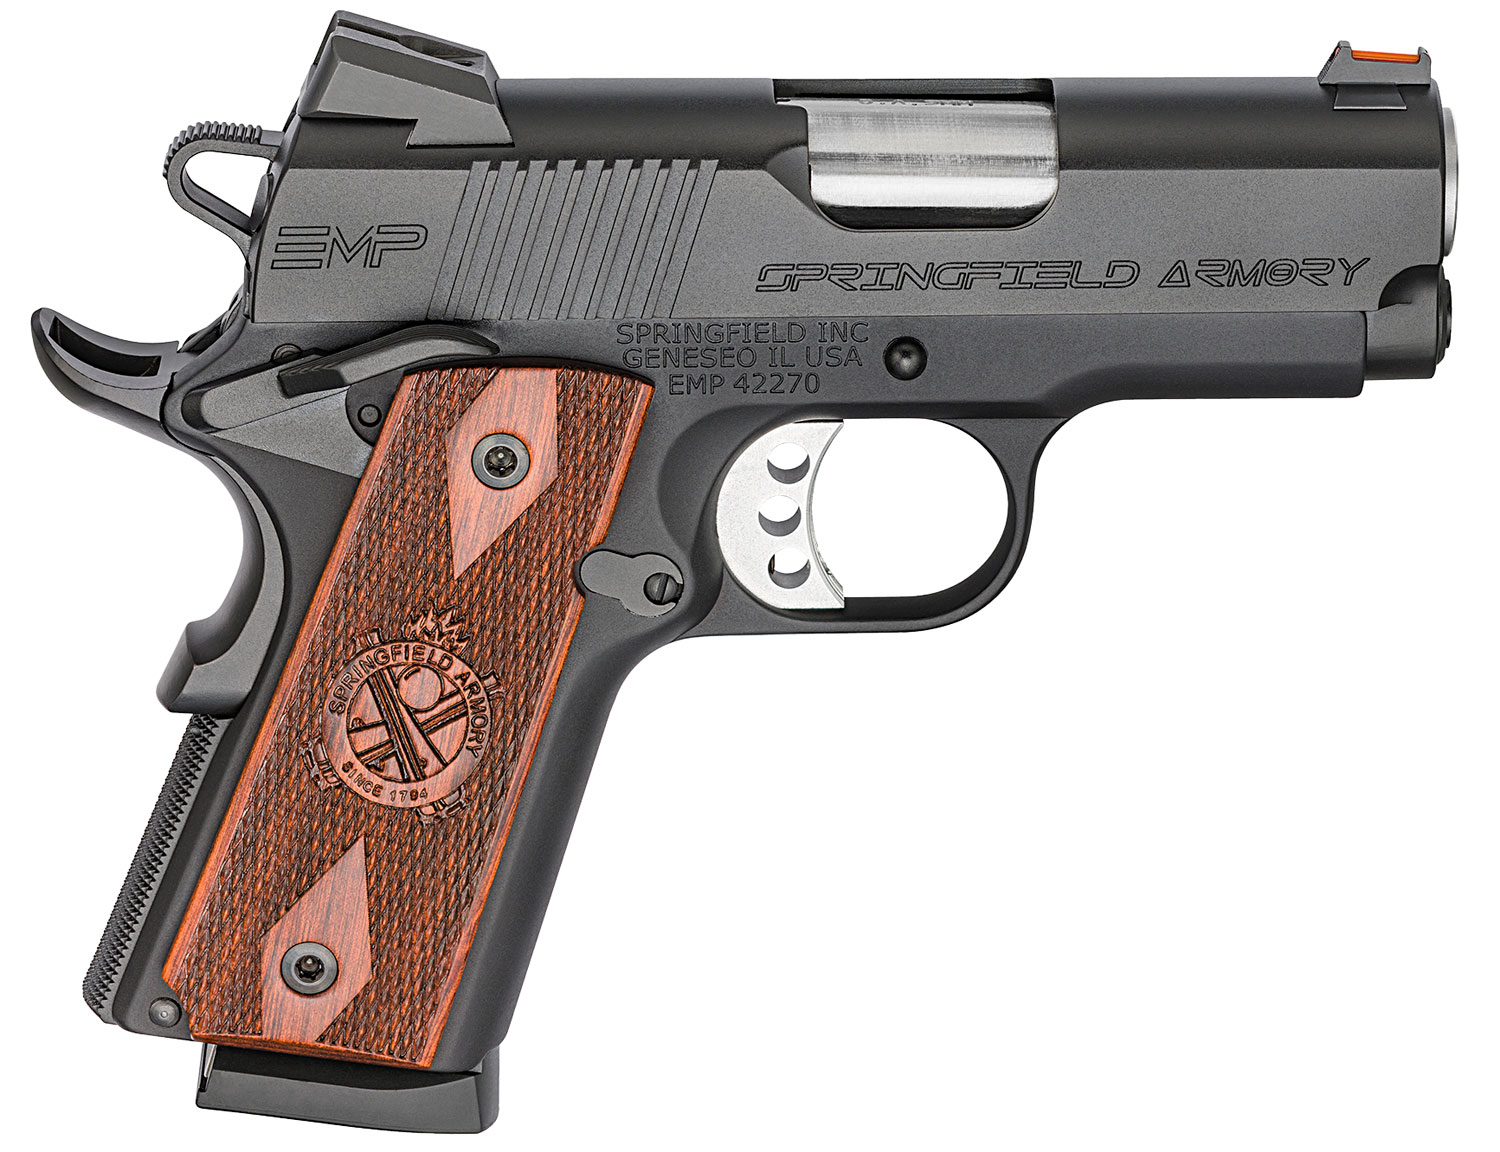 springfield 9mm review